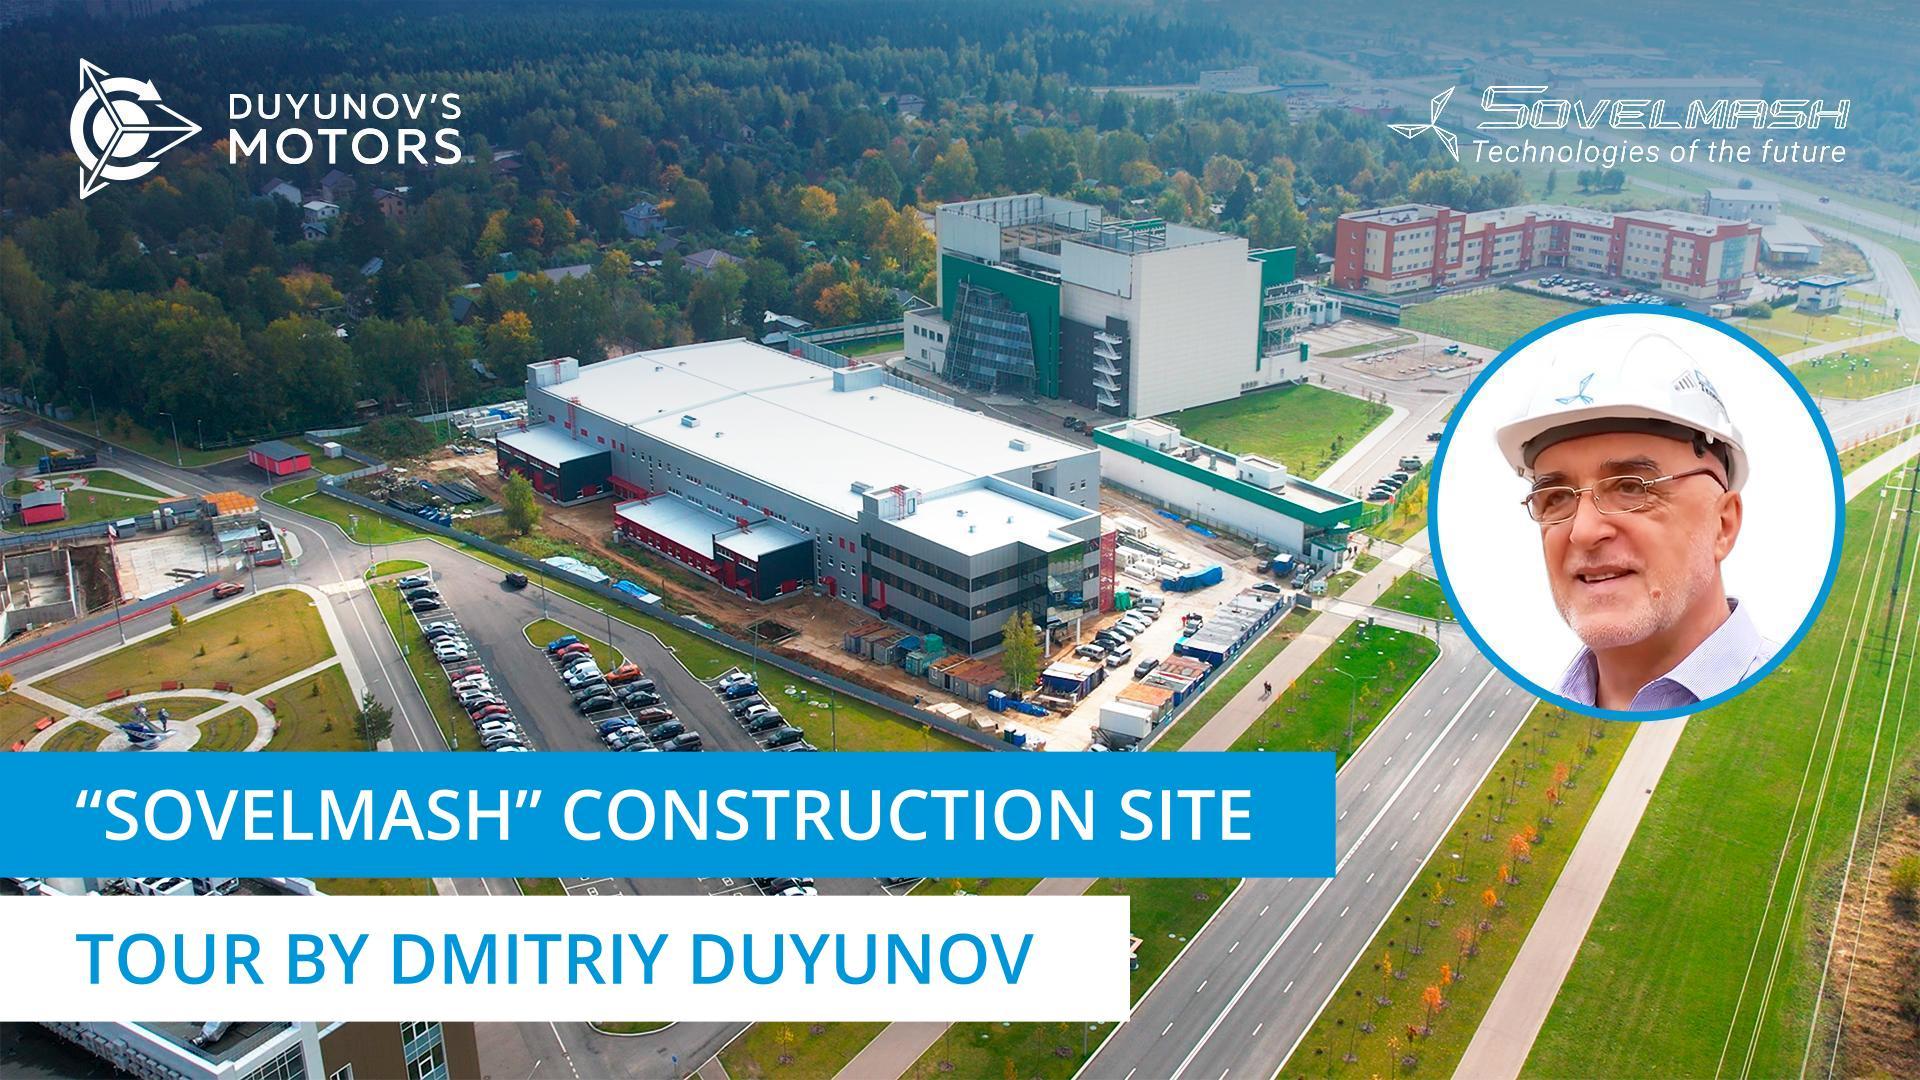 A tour of the "Sovelmash" construction site by Dmitriy Duyunov